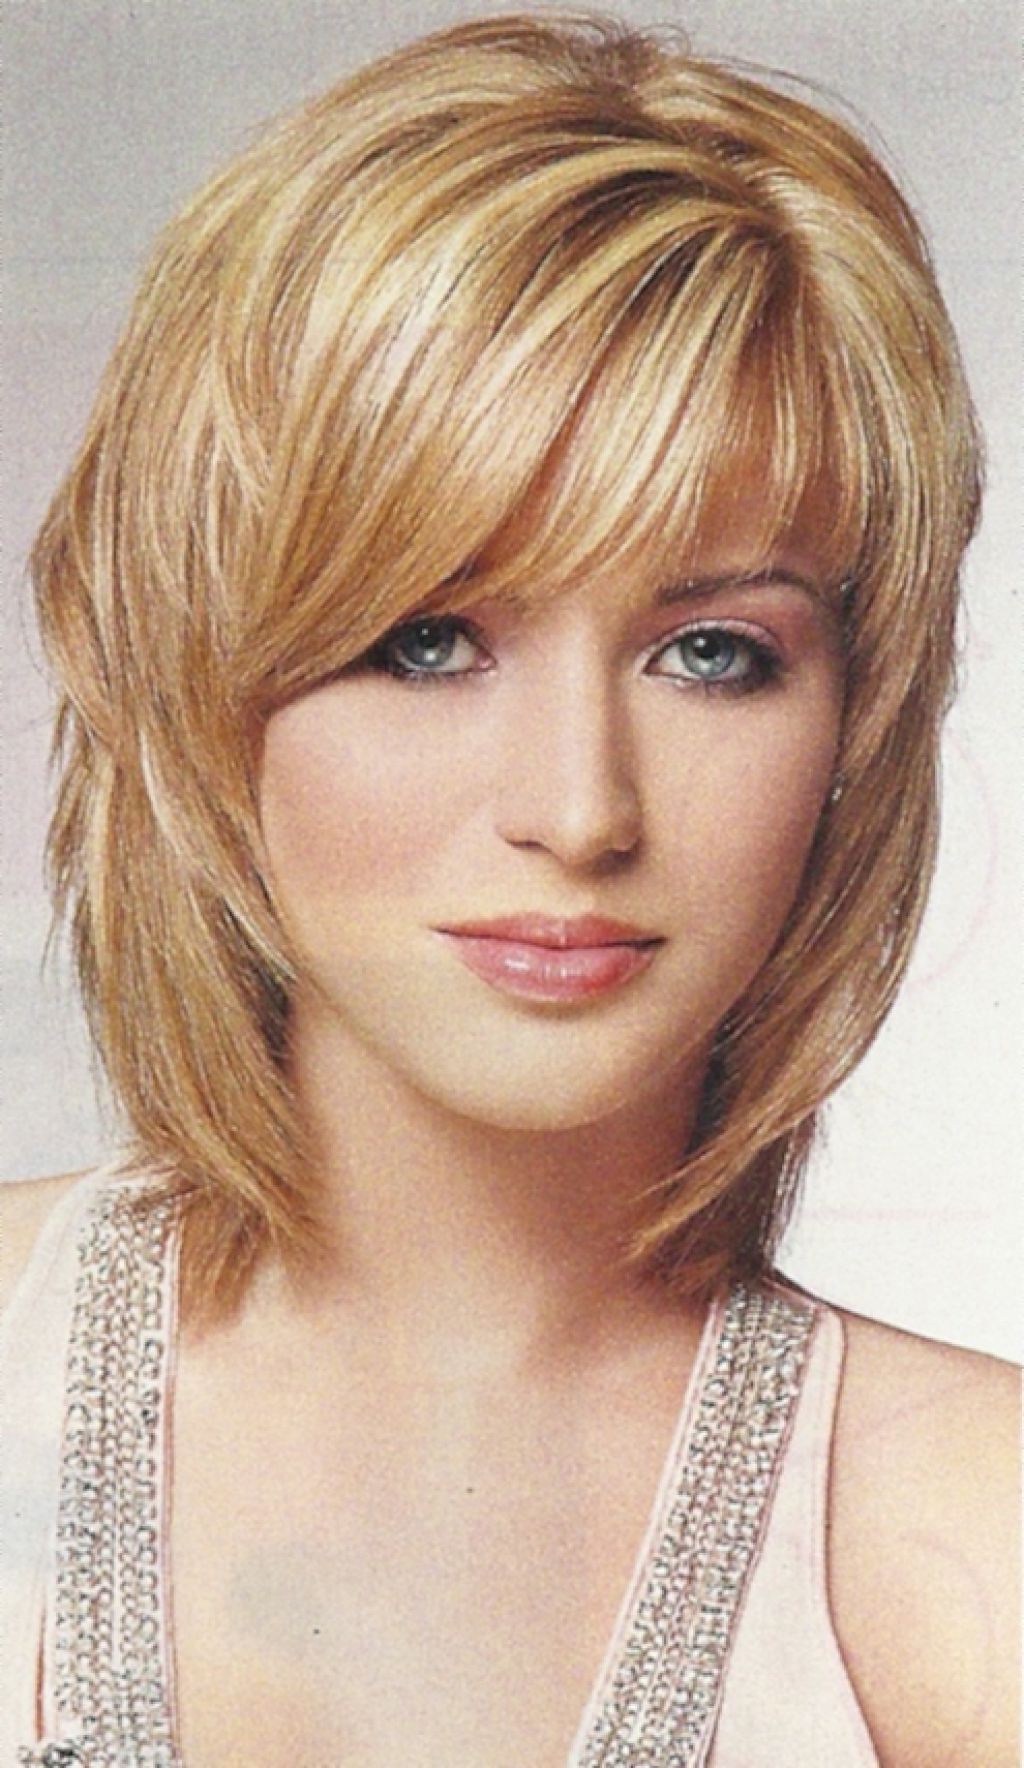 2017 Cute Medium Haircuts With Bangs In Cute Medium Short Hairstyles – Hairstyle For Women & Man (View 19 of 20)